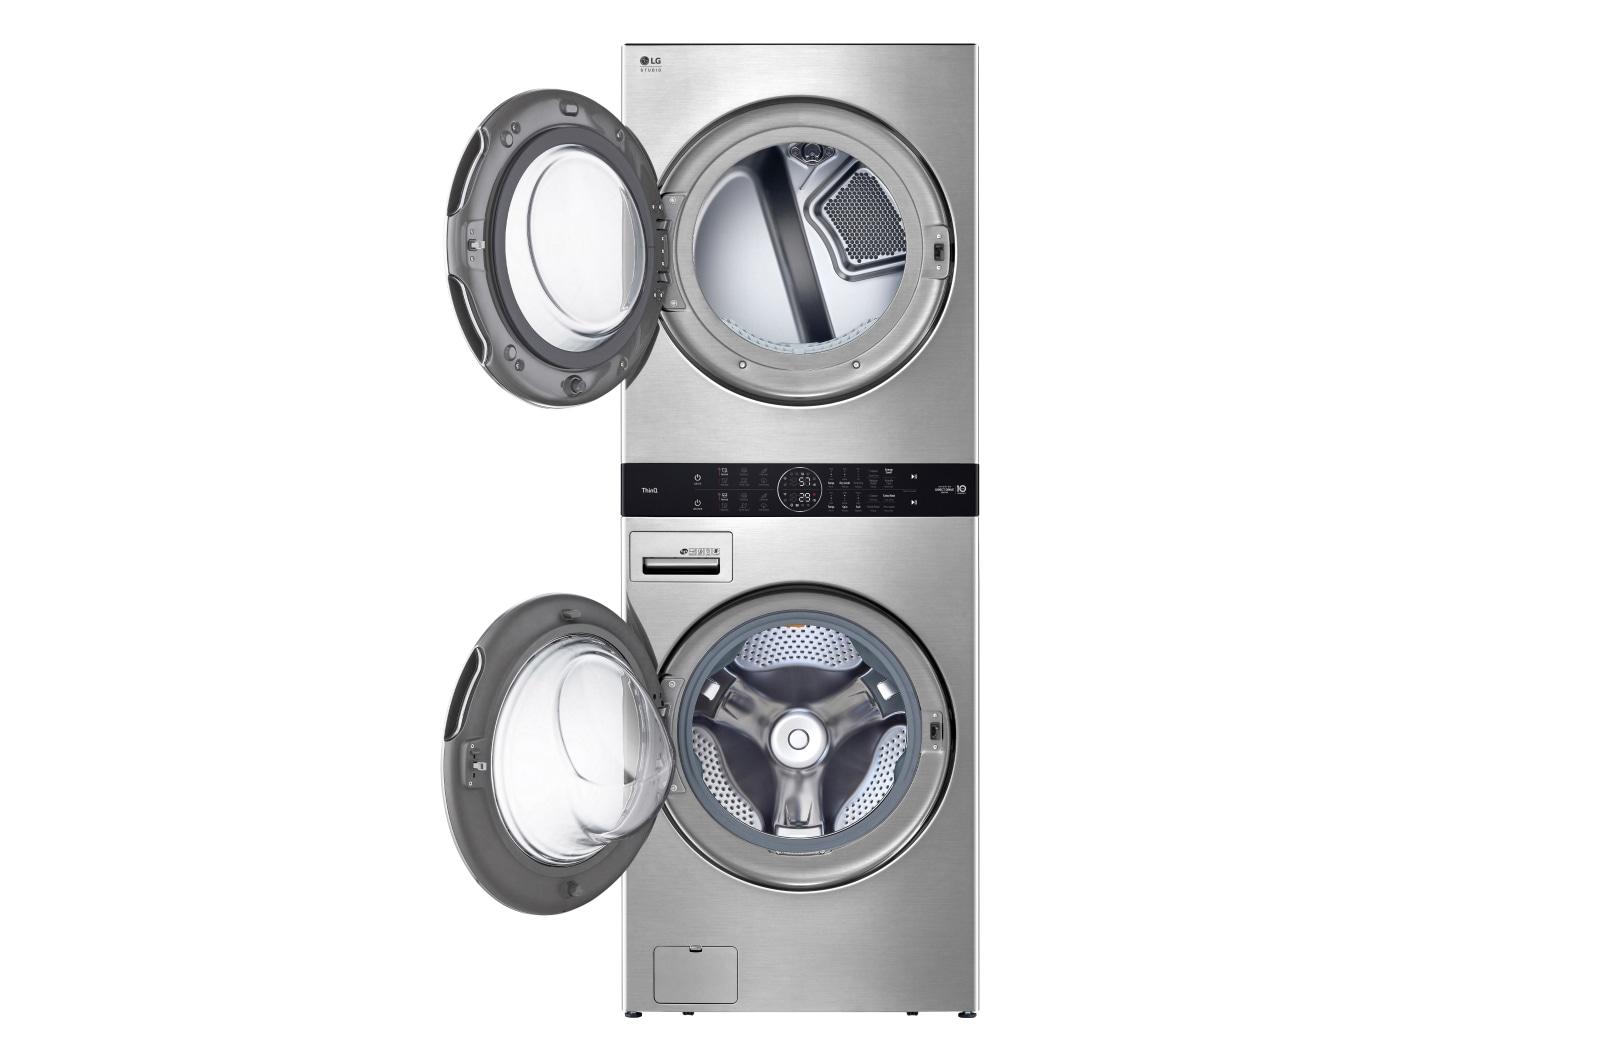 LG STUDIO Single Unit Front Load WashTower™ with Center Control™ 5.0 cu. ft. Washer and 7.4 cu. ft. Electric Dryer